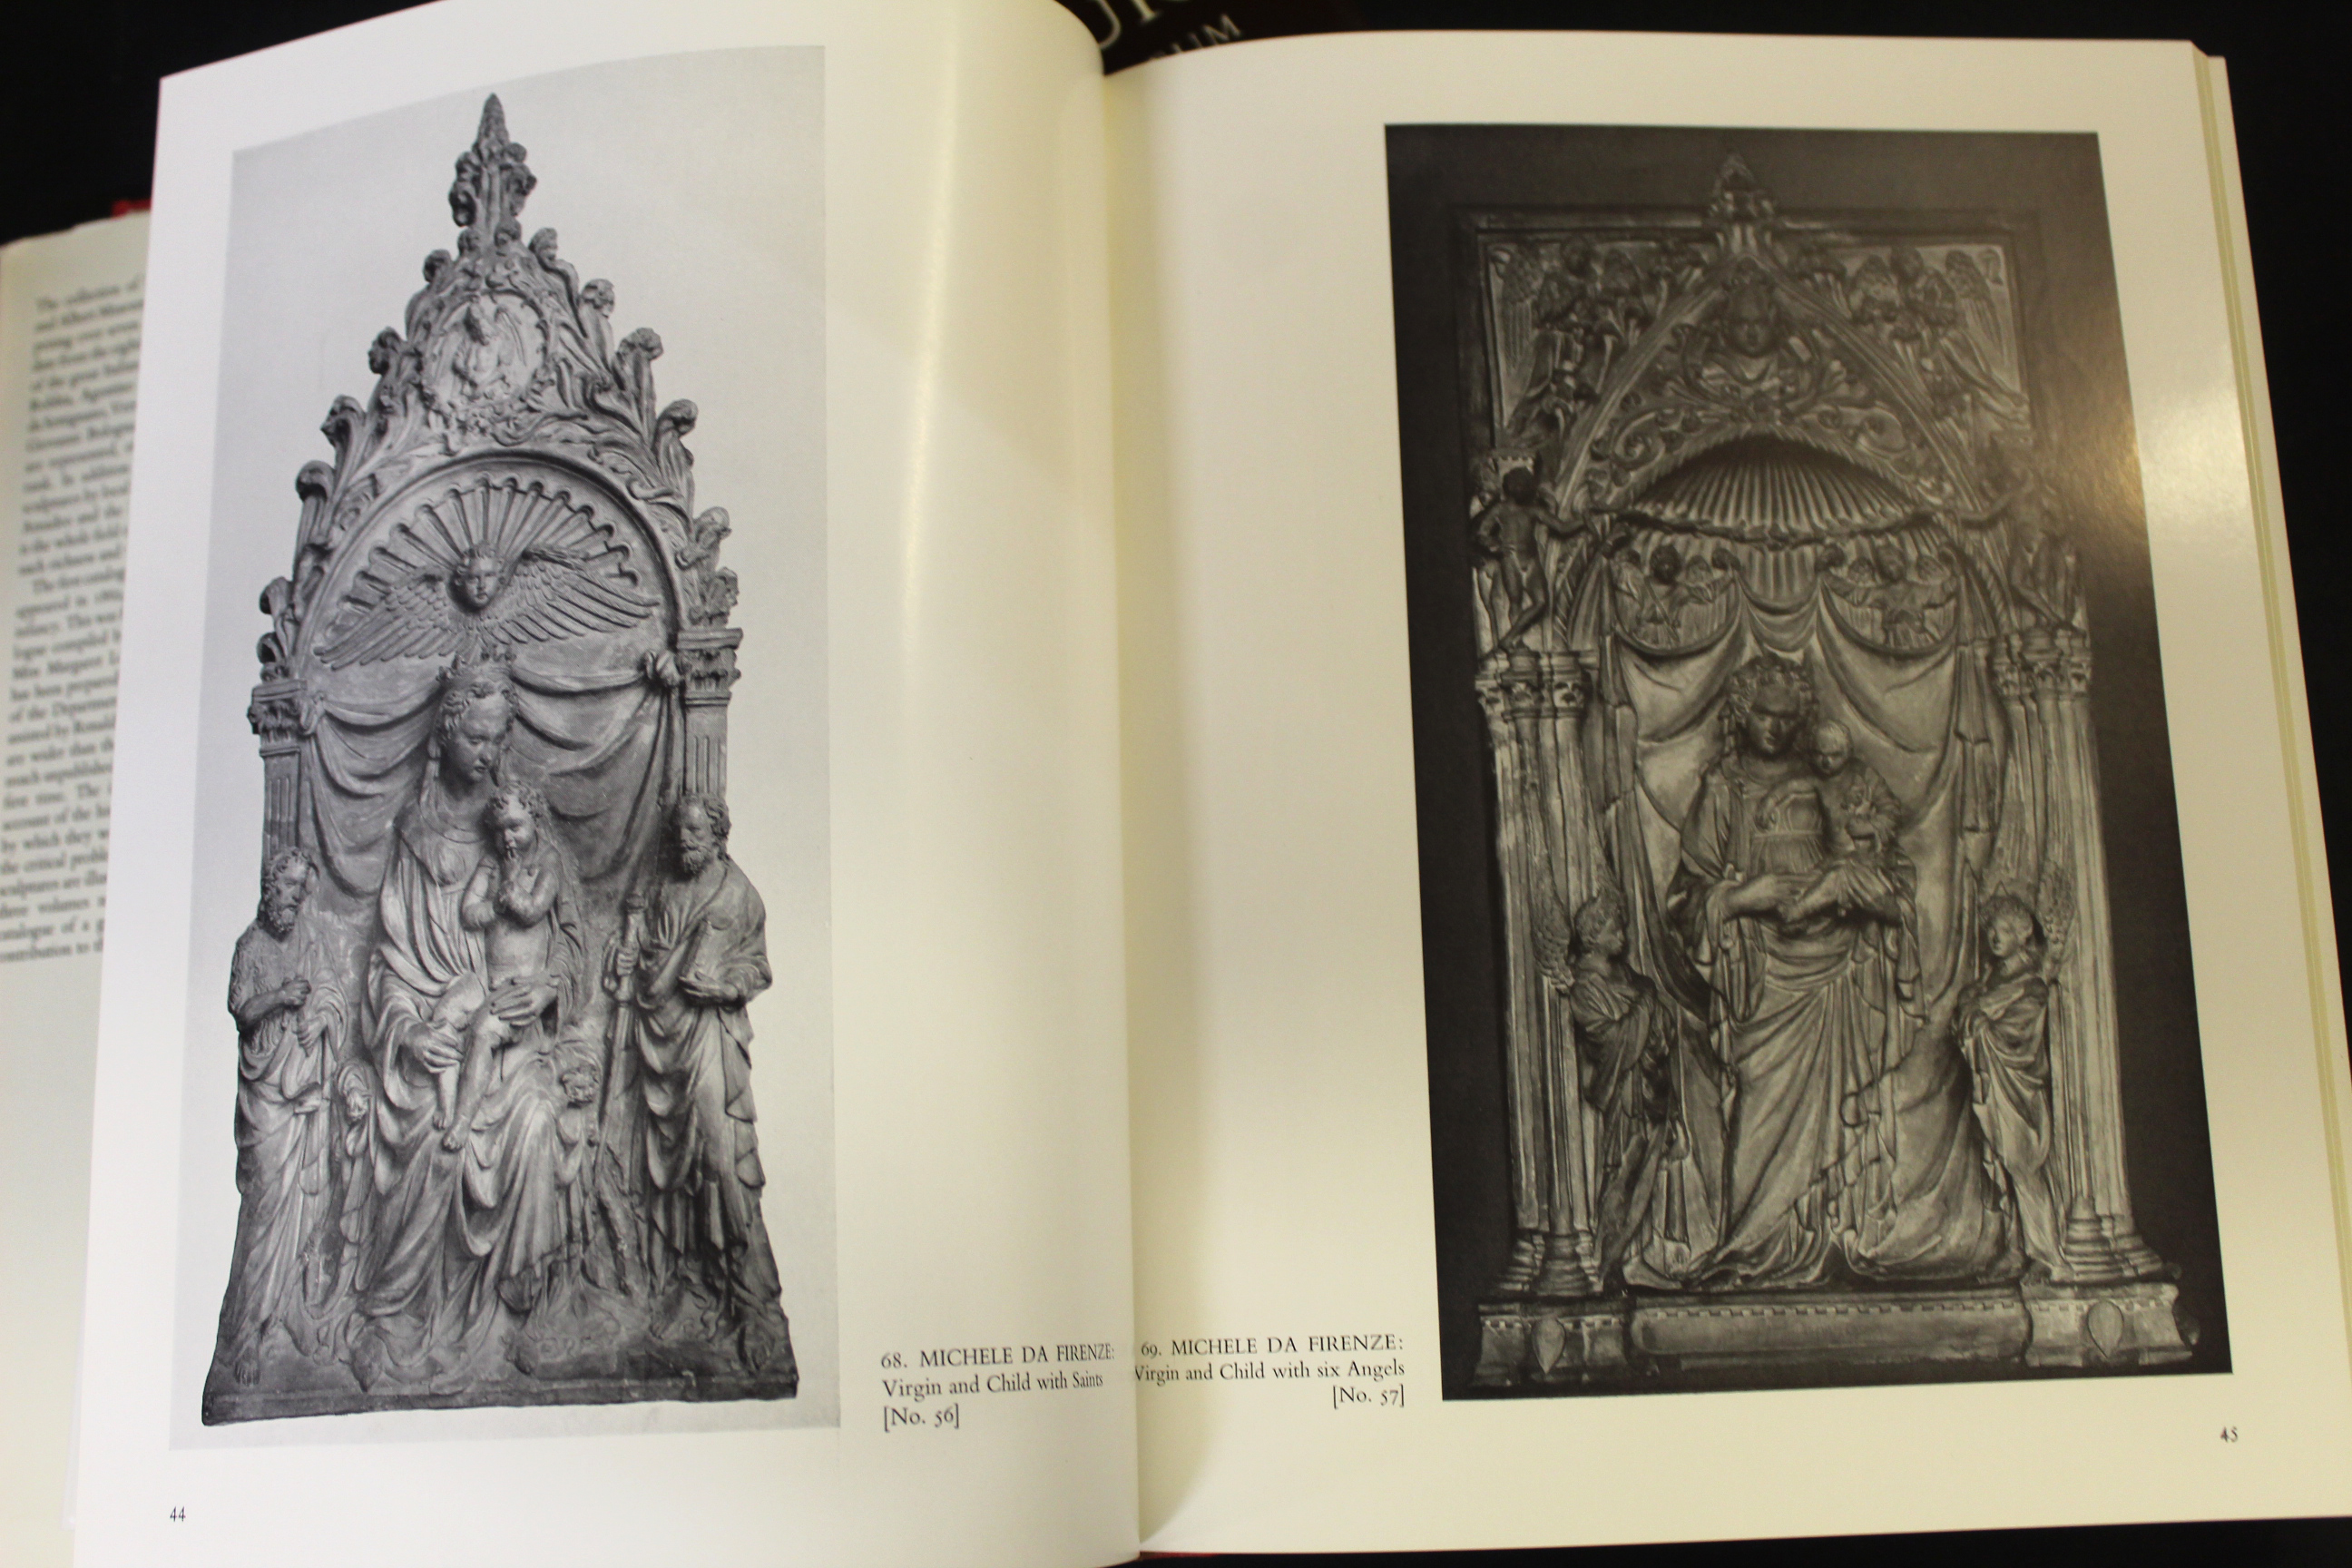 JOHN POPE-HENNESSY: CATALOGUE OF ITALIAN SCULPTURE IN THE VICTORIA AND ALBERT MUSEUM, London, - Image 2 of 4